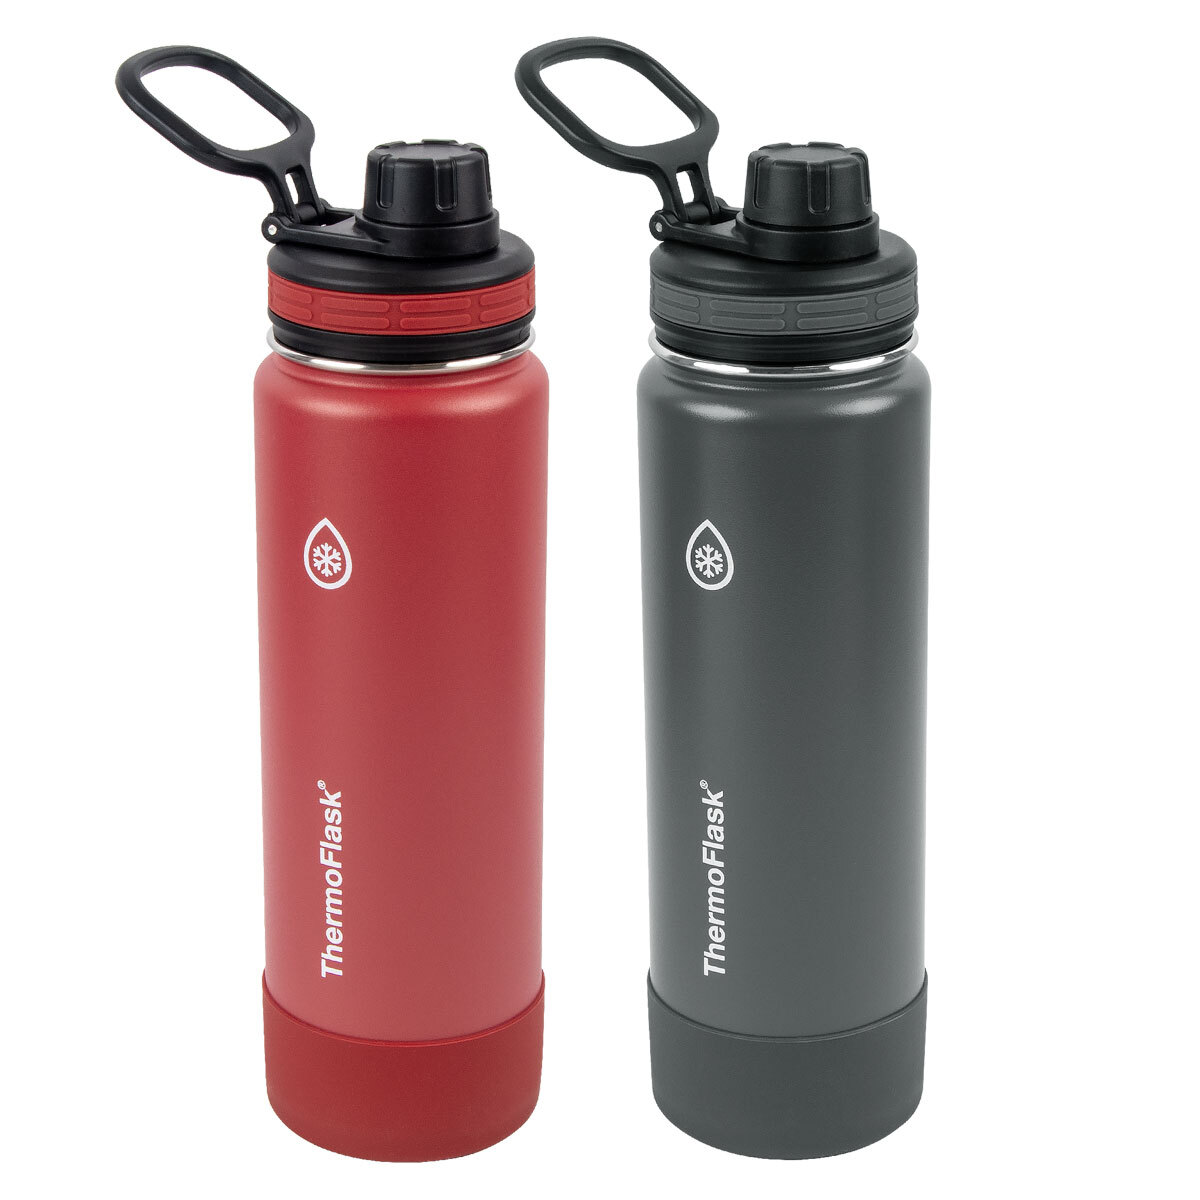 ThermoFlask Autospout Stainless Steel Double Wall Vacuum Insulated 710ml Bottles, 2 Pack in Red and Grey